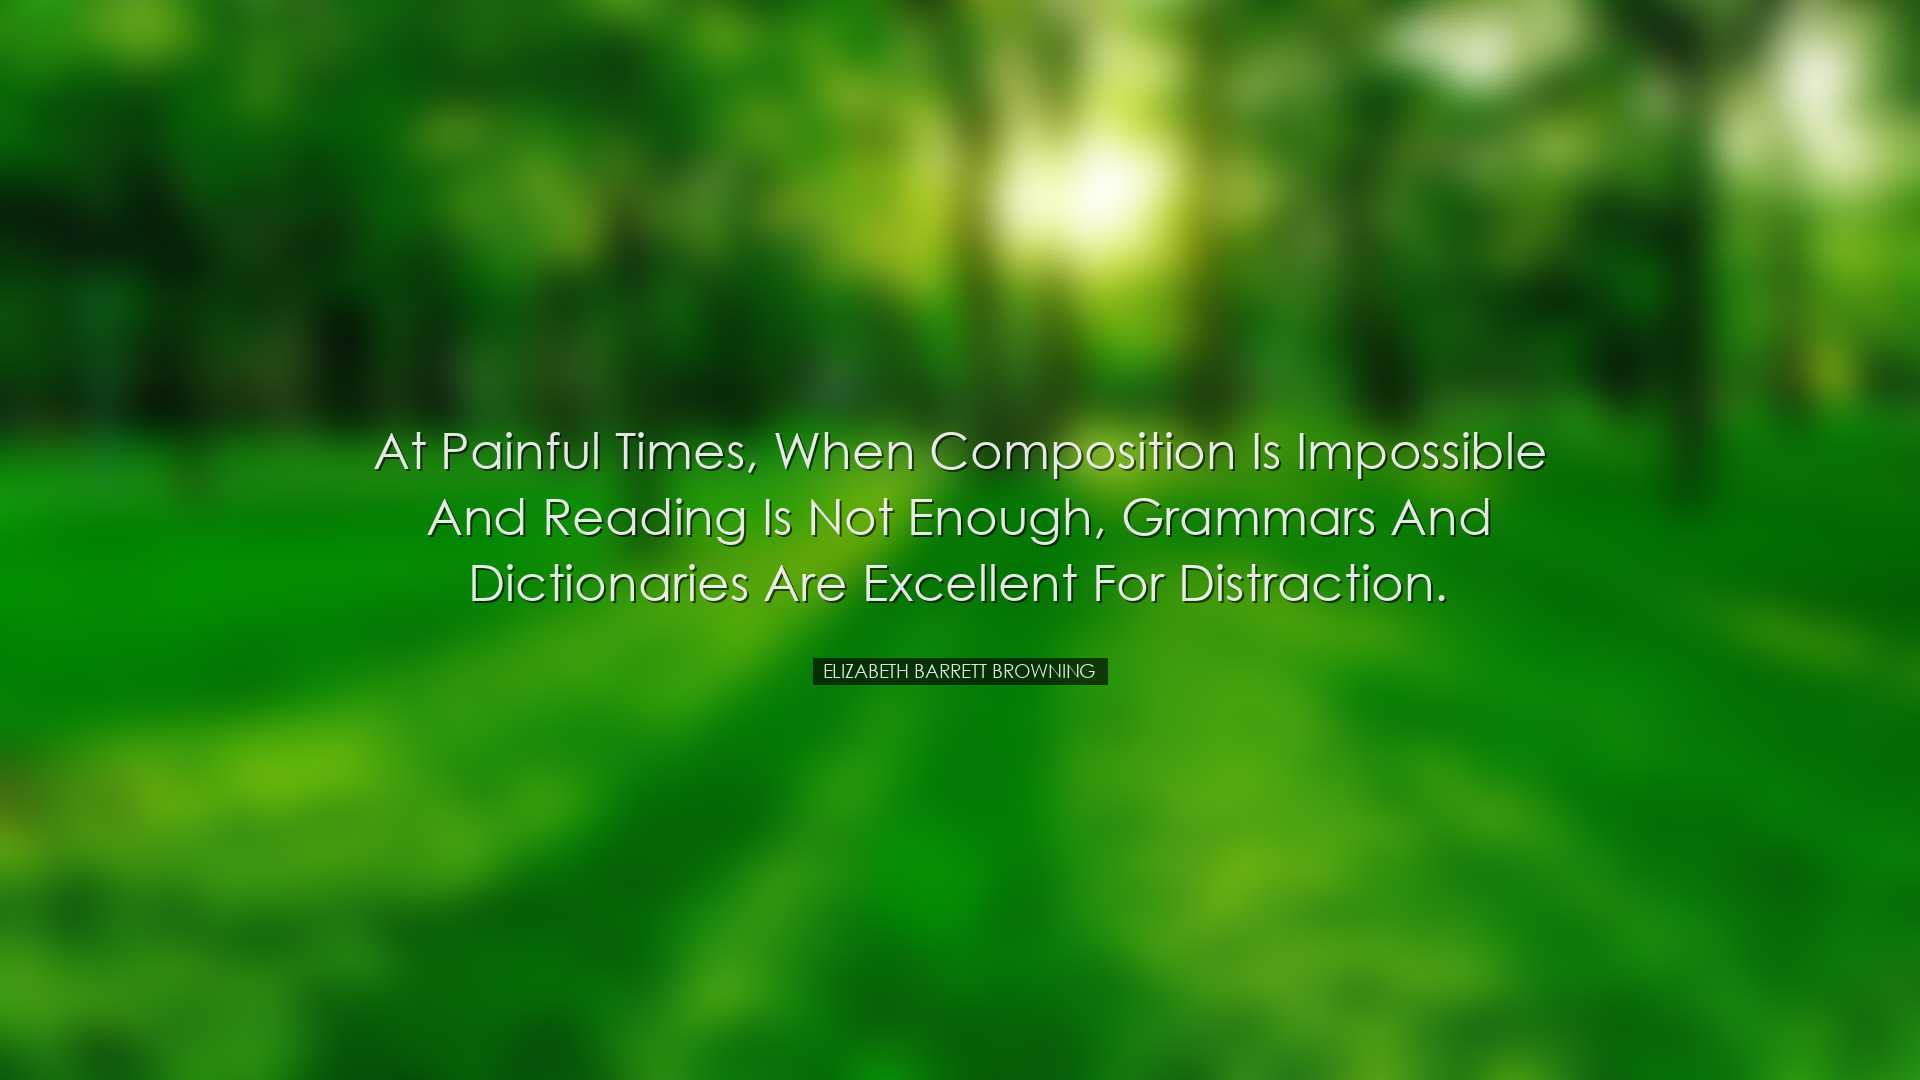 At painful times, when composition is impossible and reading is no